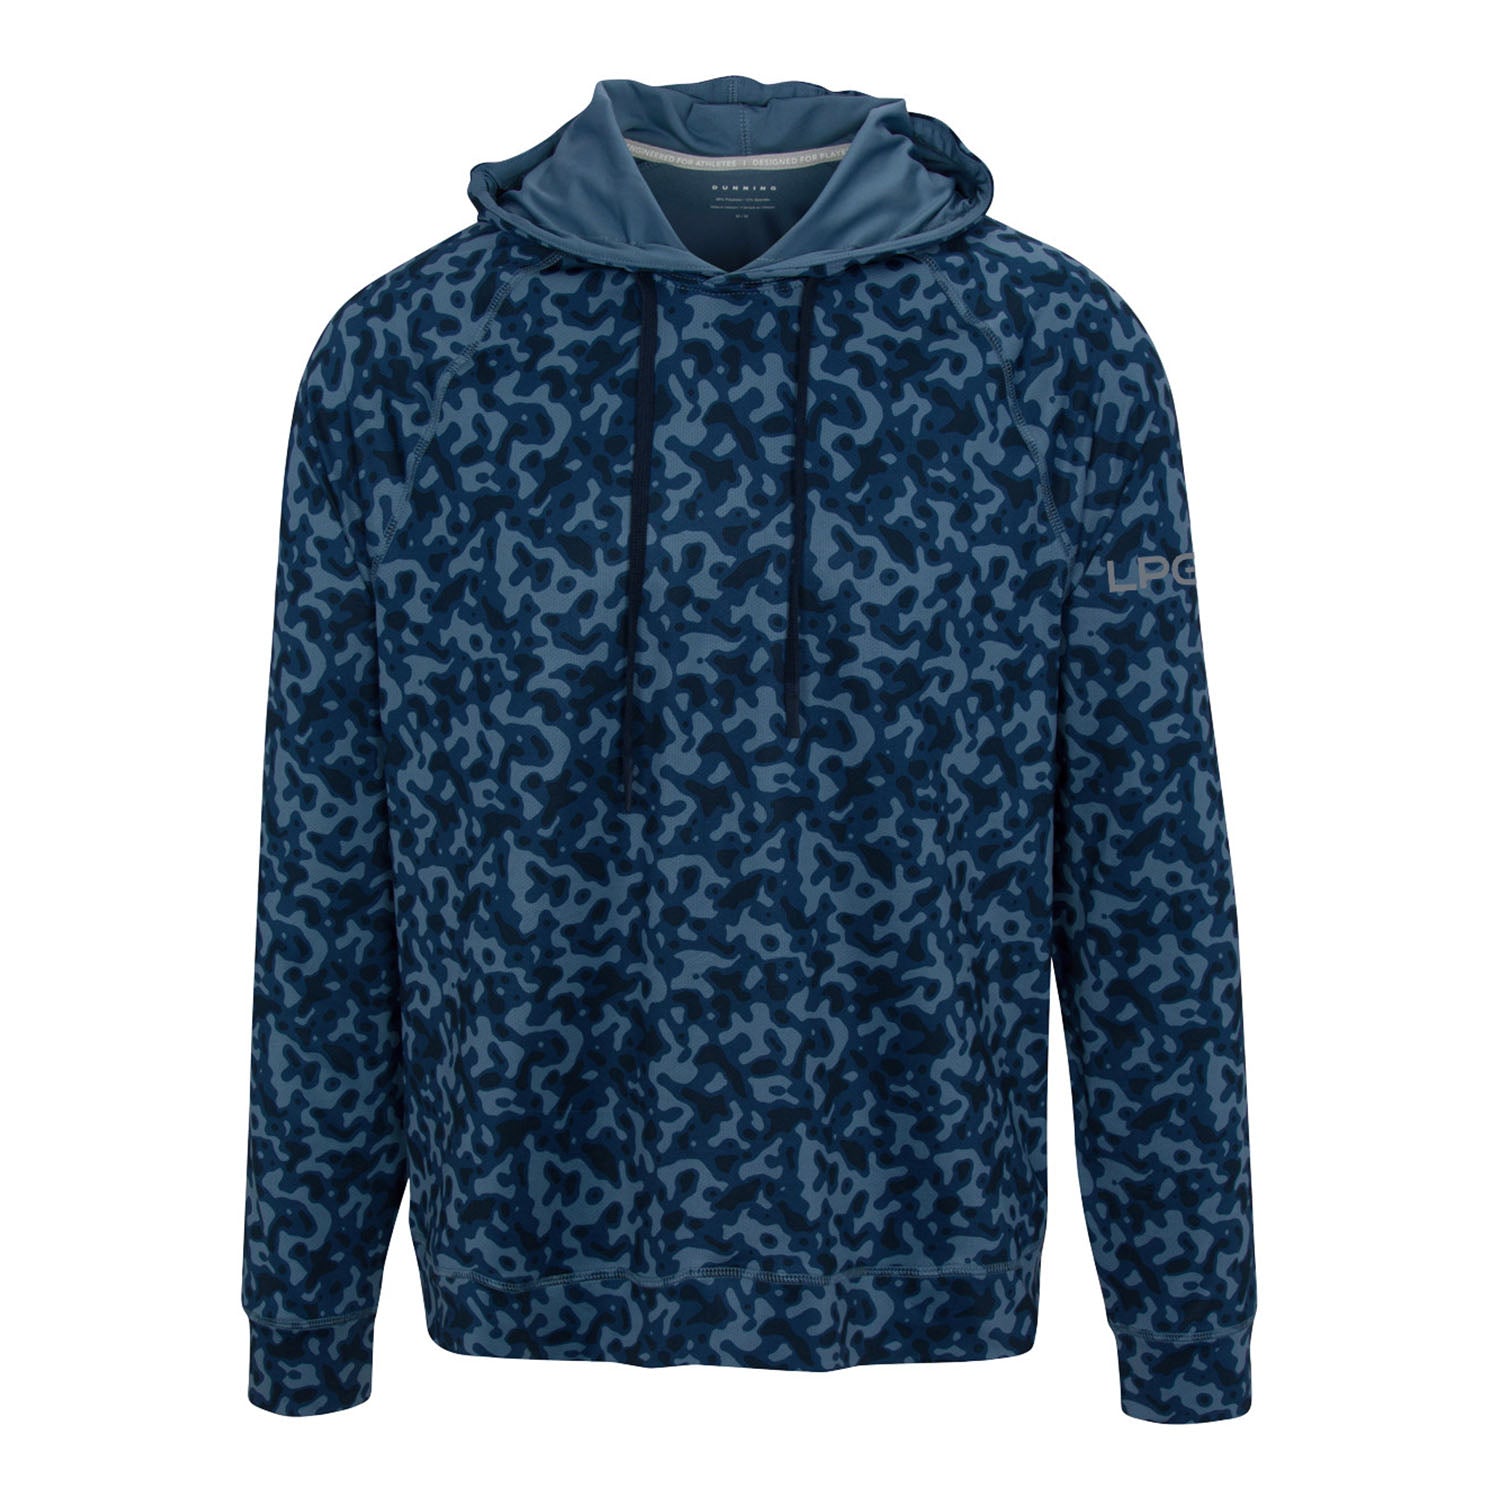 Dunning LPGA Golf Men's Quest Ventilated Camouflage Mesh Performance Hoodie in Blue - Front View